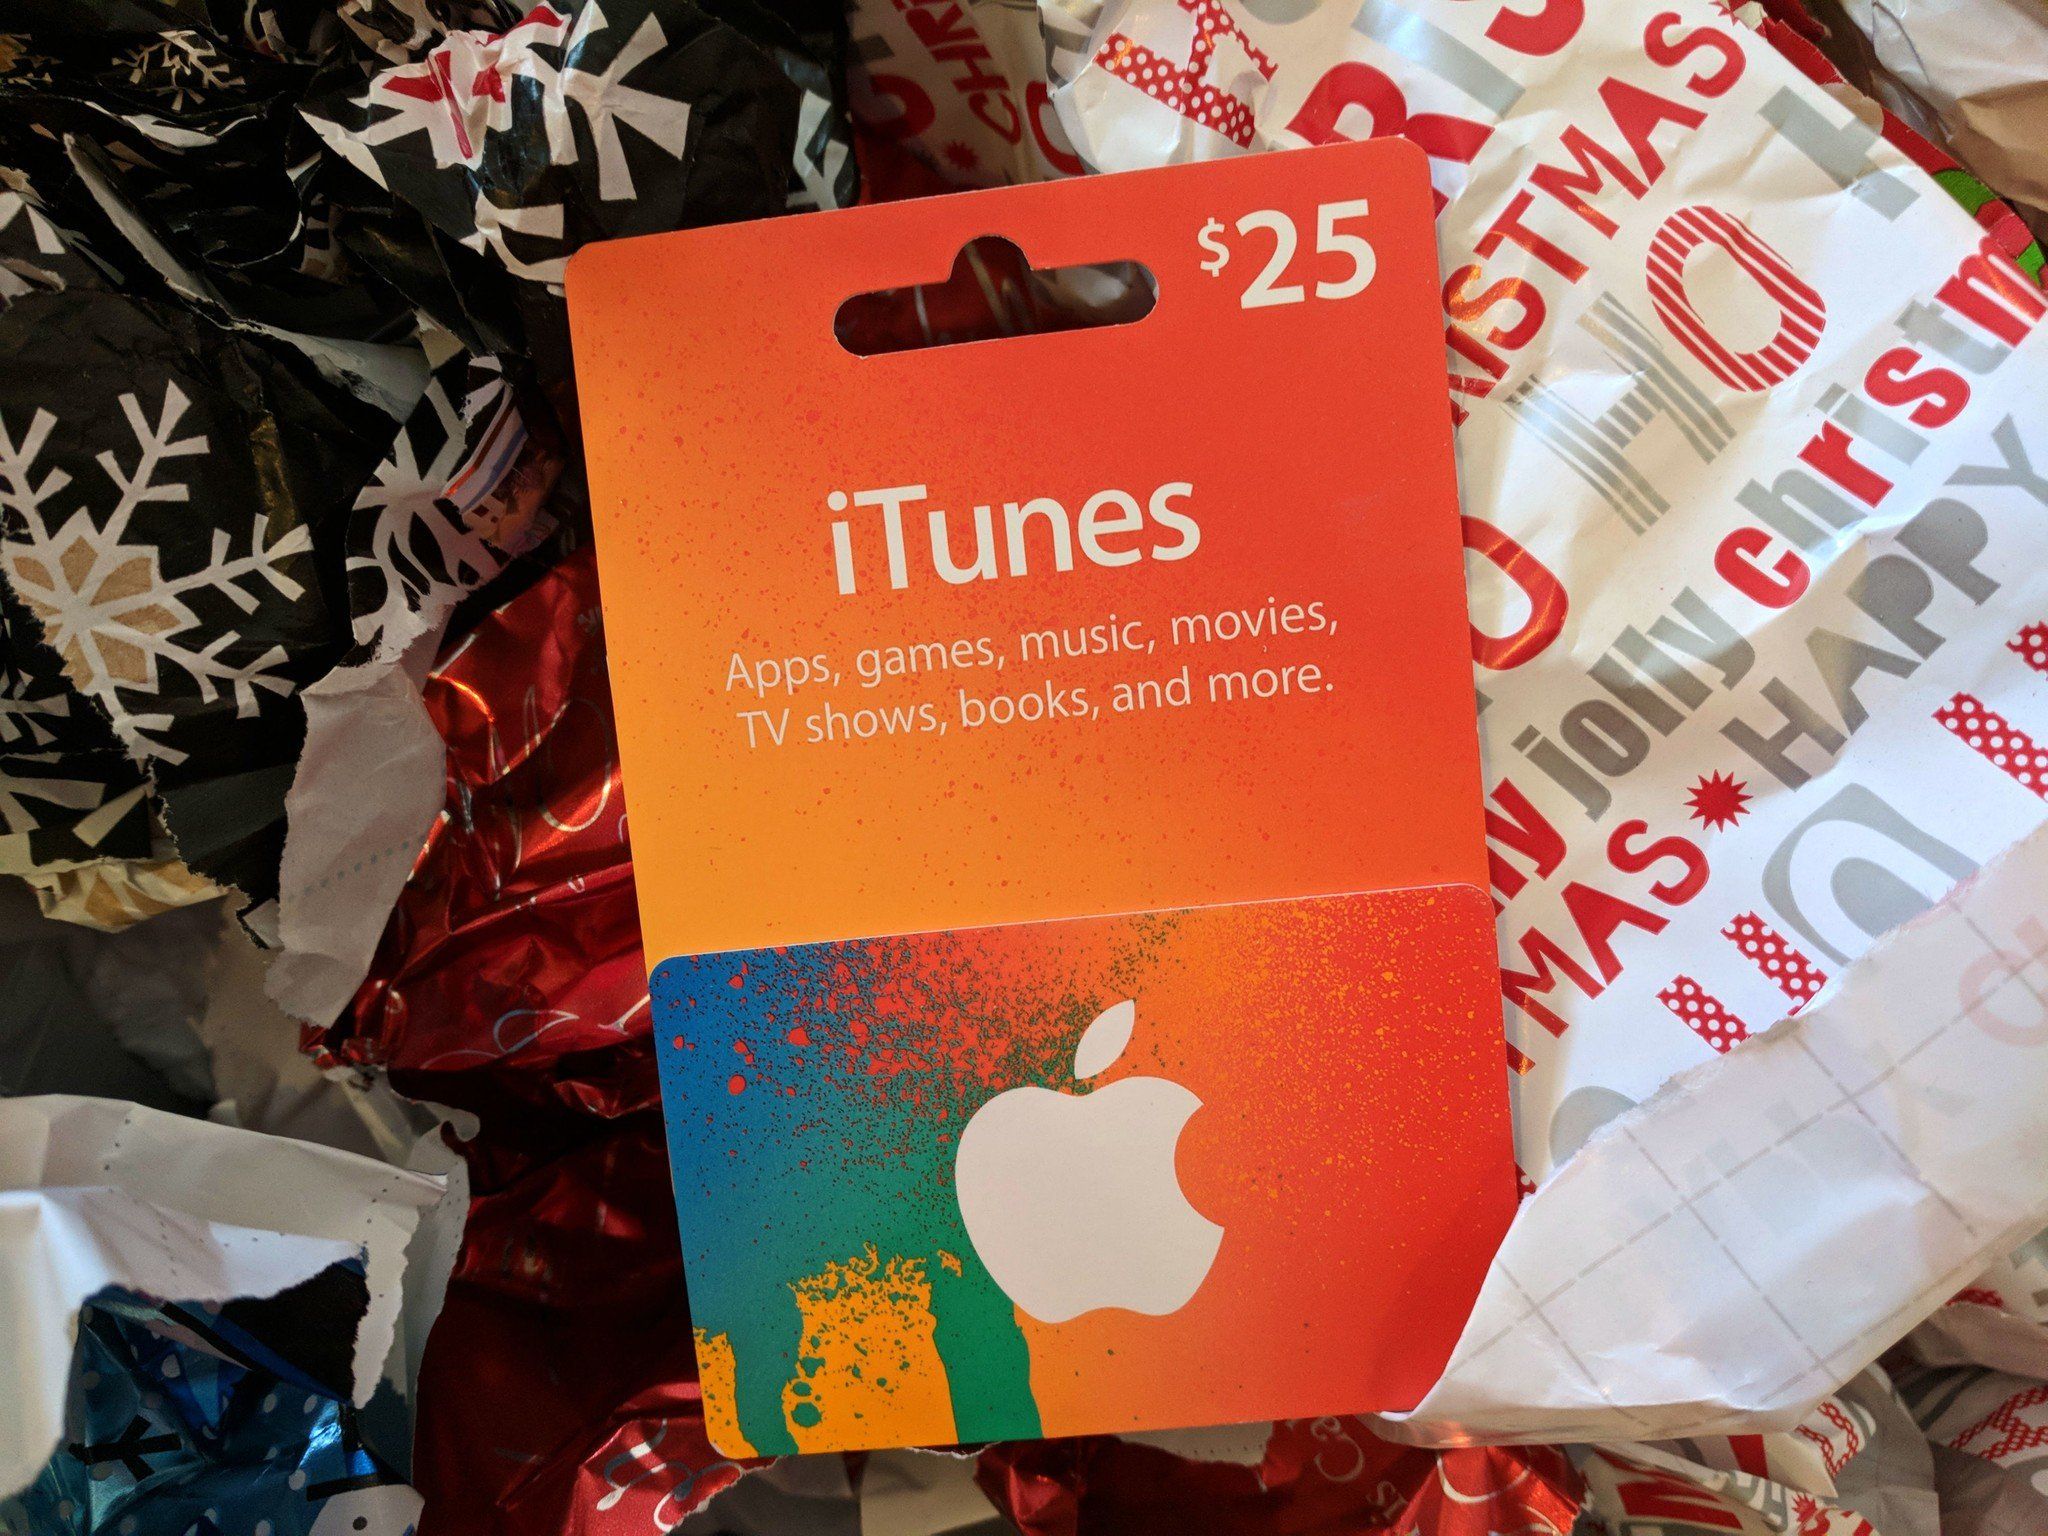 Converting iTunes Gift Cards to Naira Made Easy | TheAmberPost